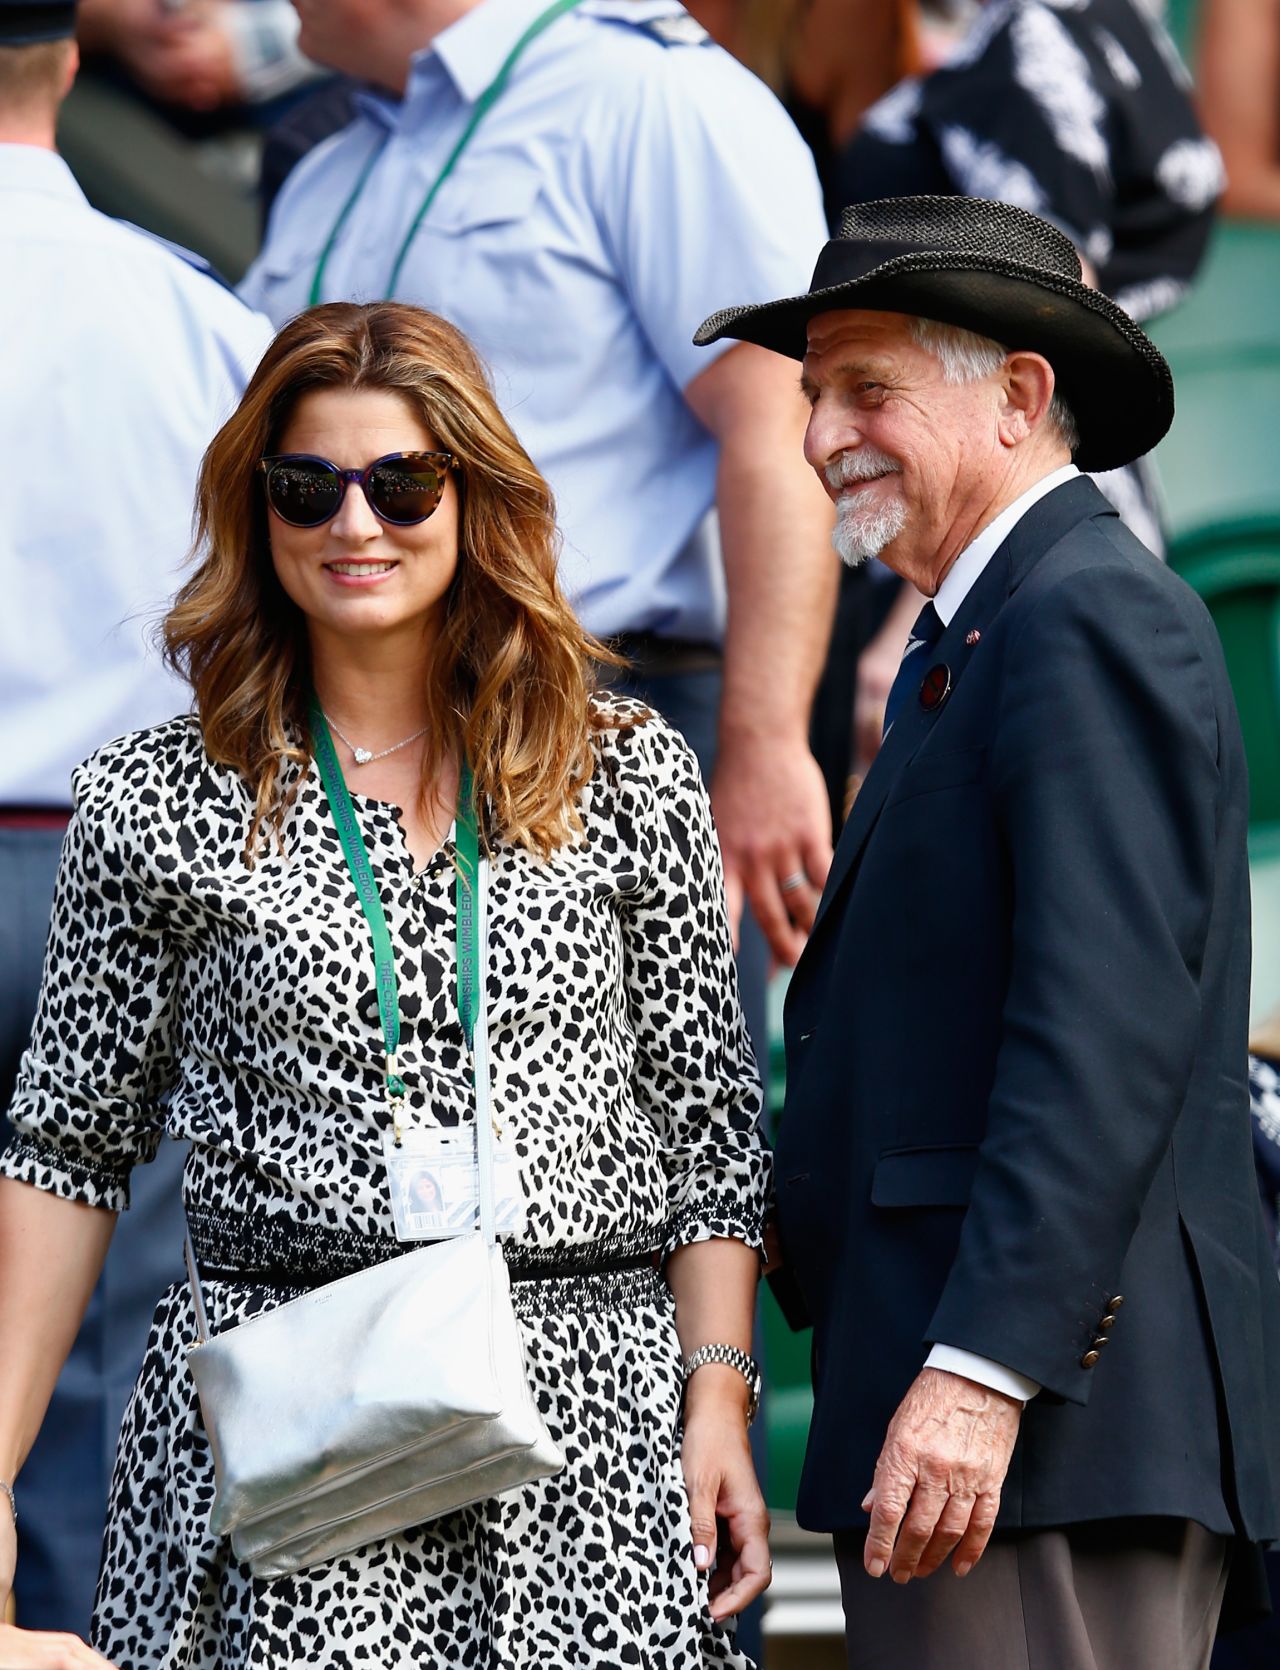 Federer's wife Mirka was also in attendance -- she will be cheering her husband as he seeks a record eighth Wimbledon men's title on Sunday.